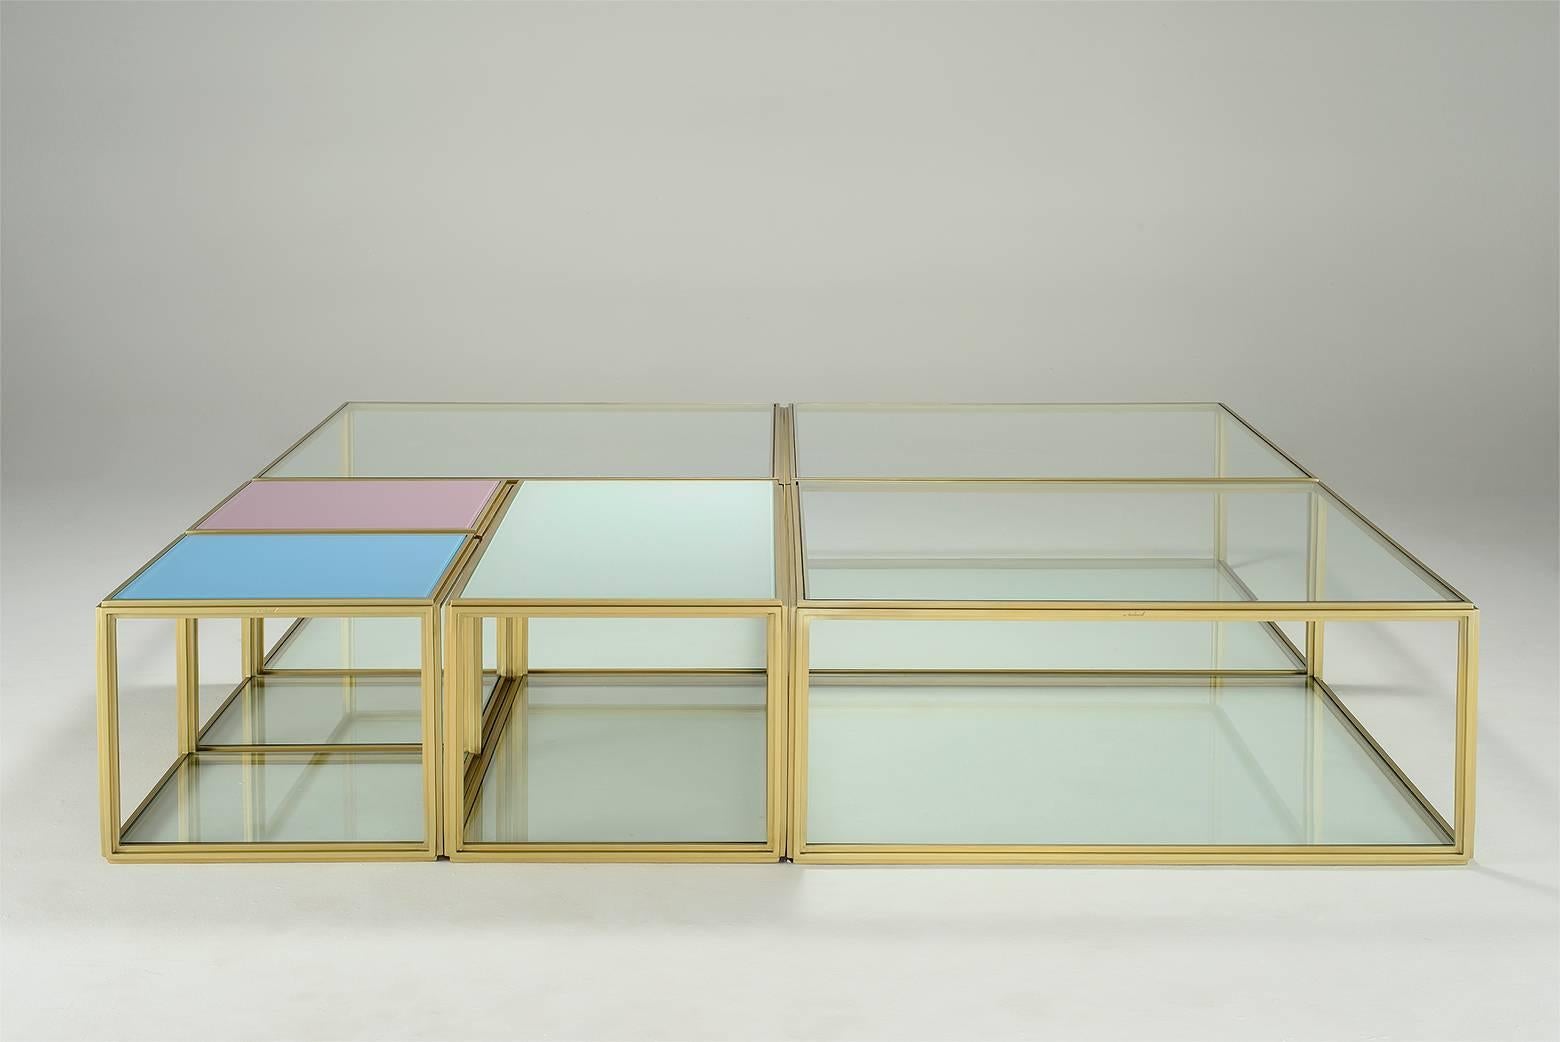 Model: Low coffee table BLTs PT6x4
Frame material: Brass
Frame finish: Golden sand
Top: Glass top ( 3 tables) bronze top (one table)
Top finish: PT6 glass tops to be decided, one bronze top with texture ( natural color)
Bottom: glass to be decided